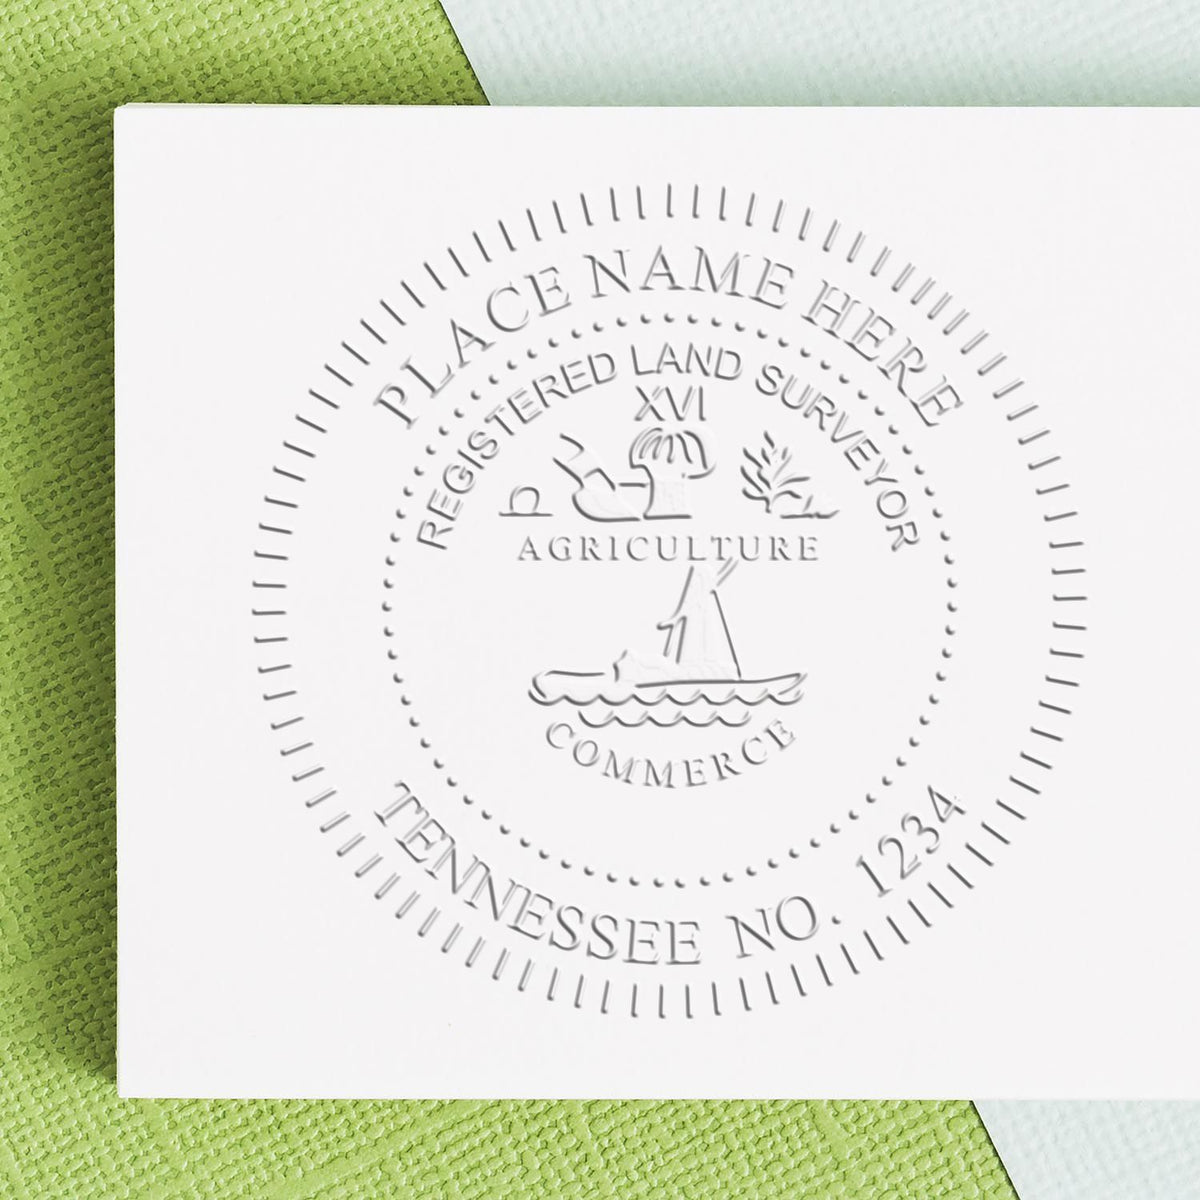 An alternative view of the Hybrid Tennessee Land Surveyor Seal stamped on a sheet of paper showing the image in use